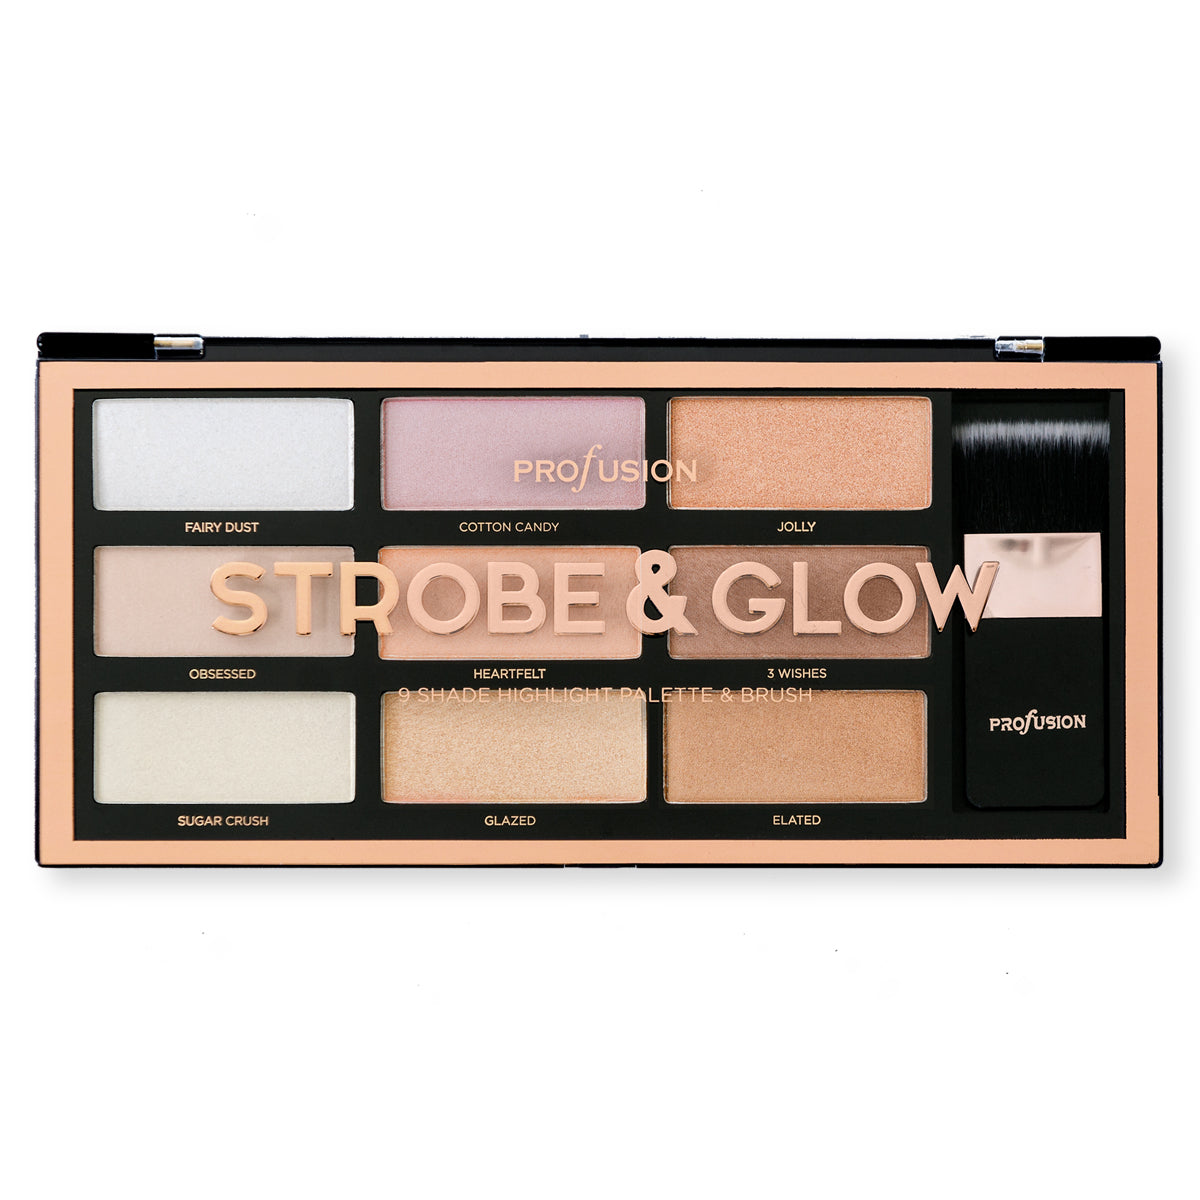 STROBE & GLOW | The Artistry Palette - profusion US